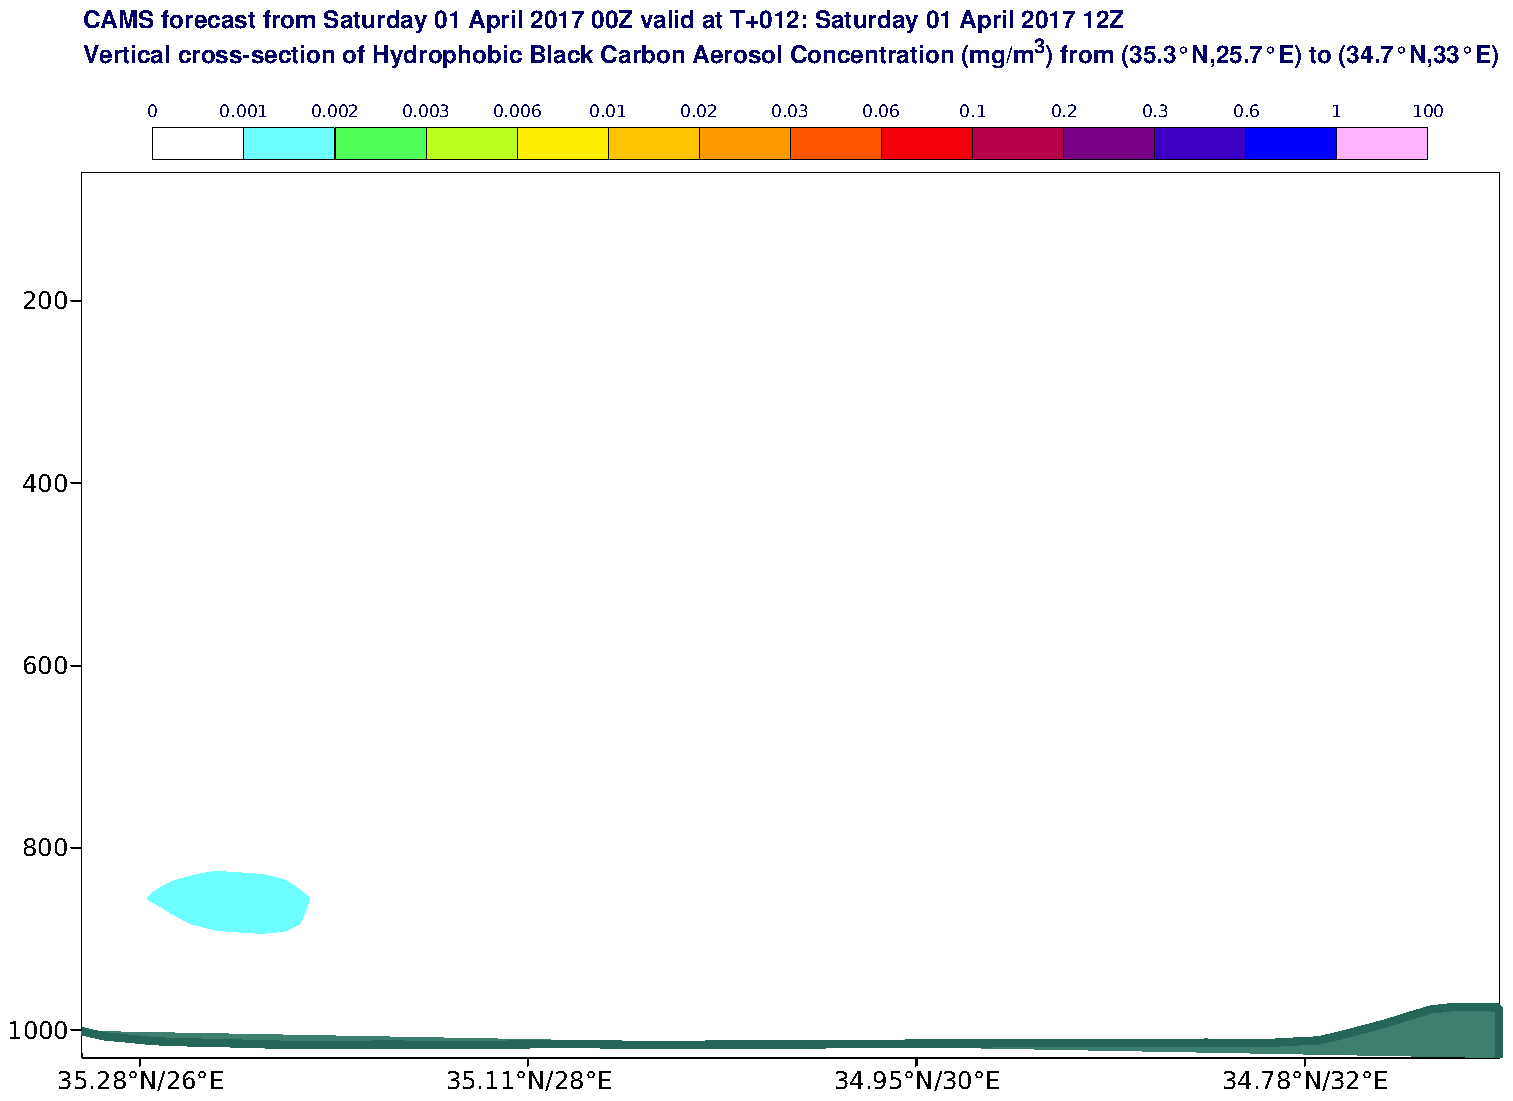 Vertical cross-section of Hydrophobic Black Carbon Aerosol Concentration (mg/m3) valid at T12 - 2017-04-01 12:00